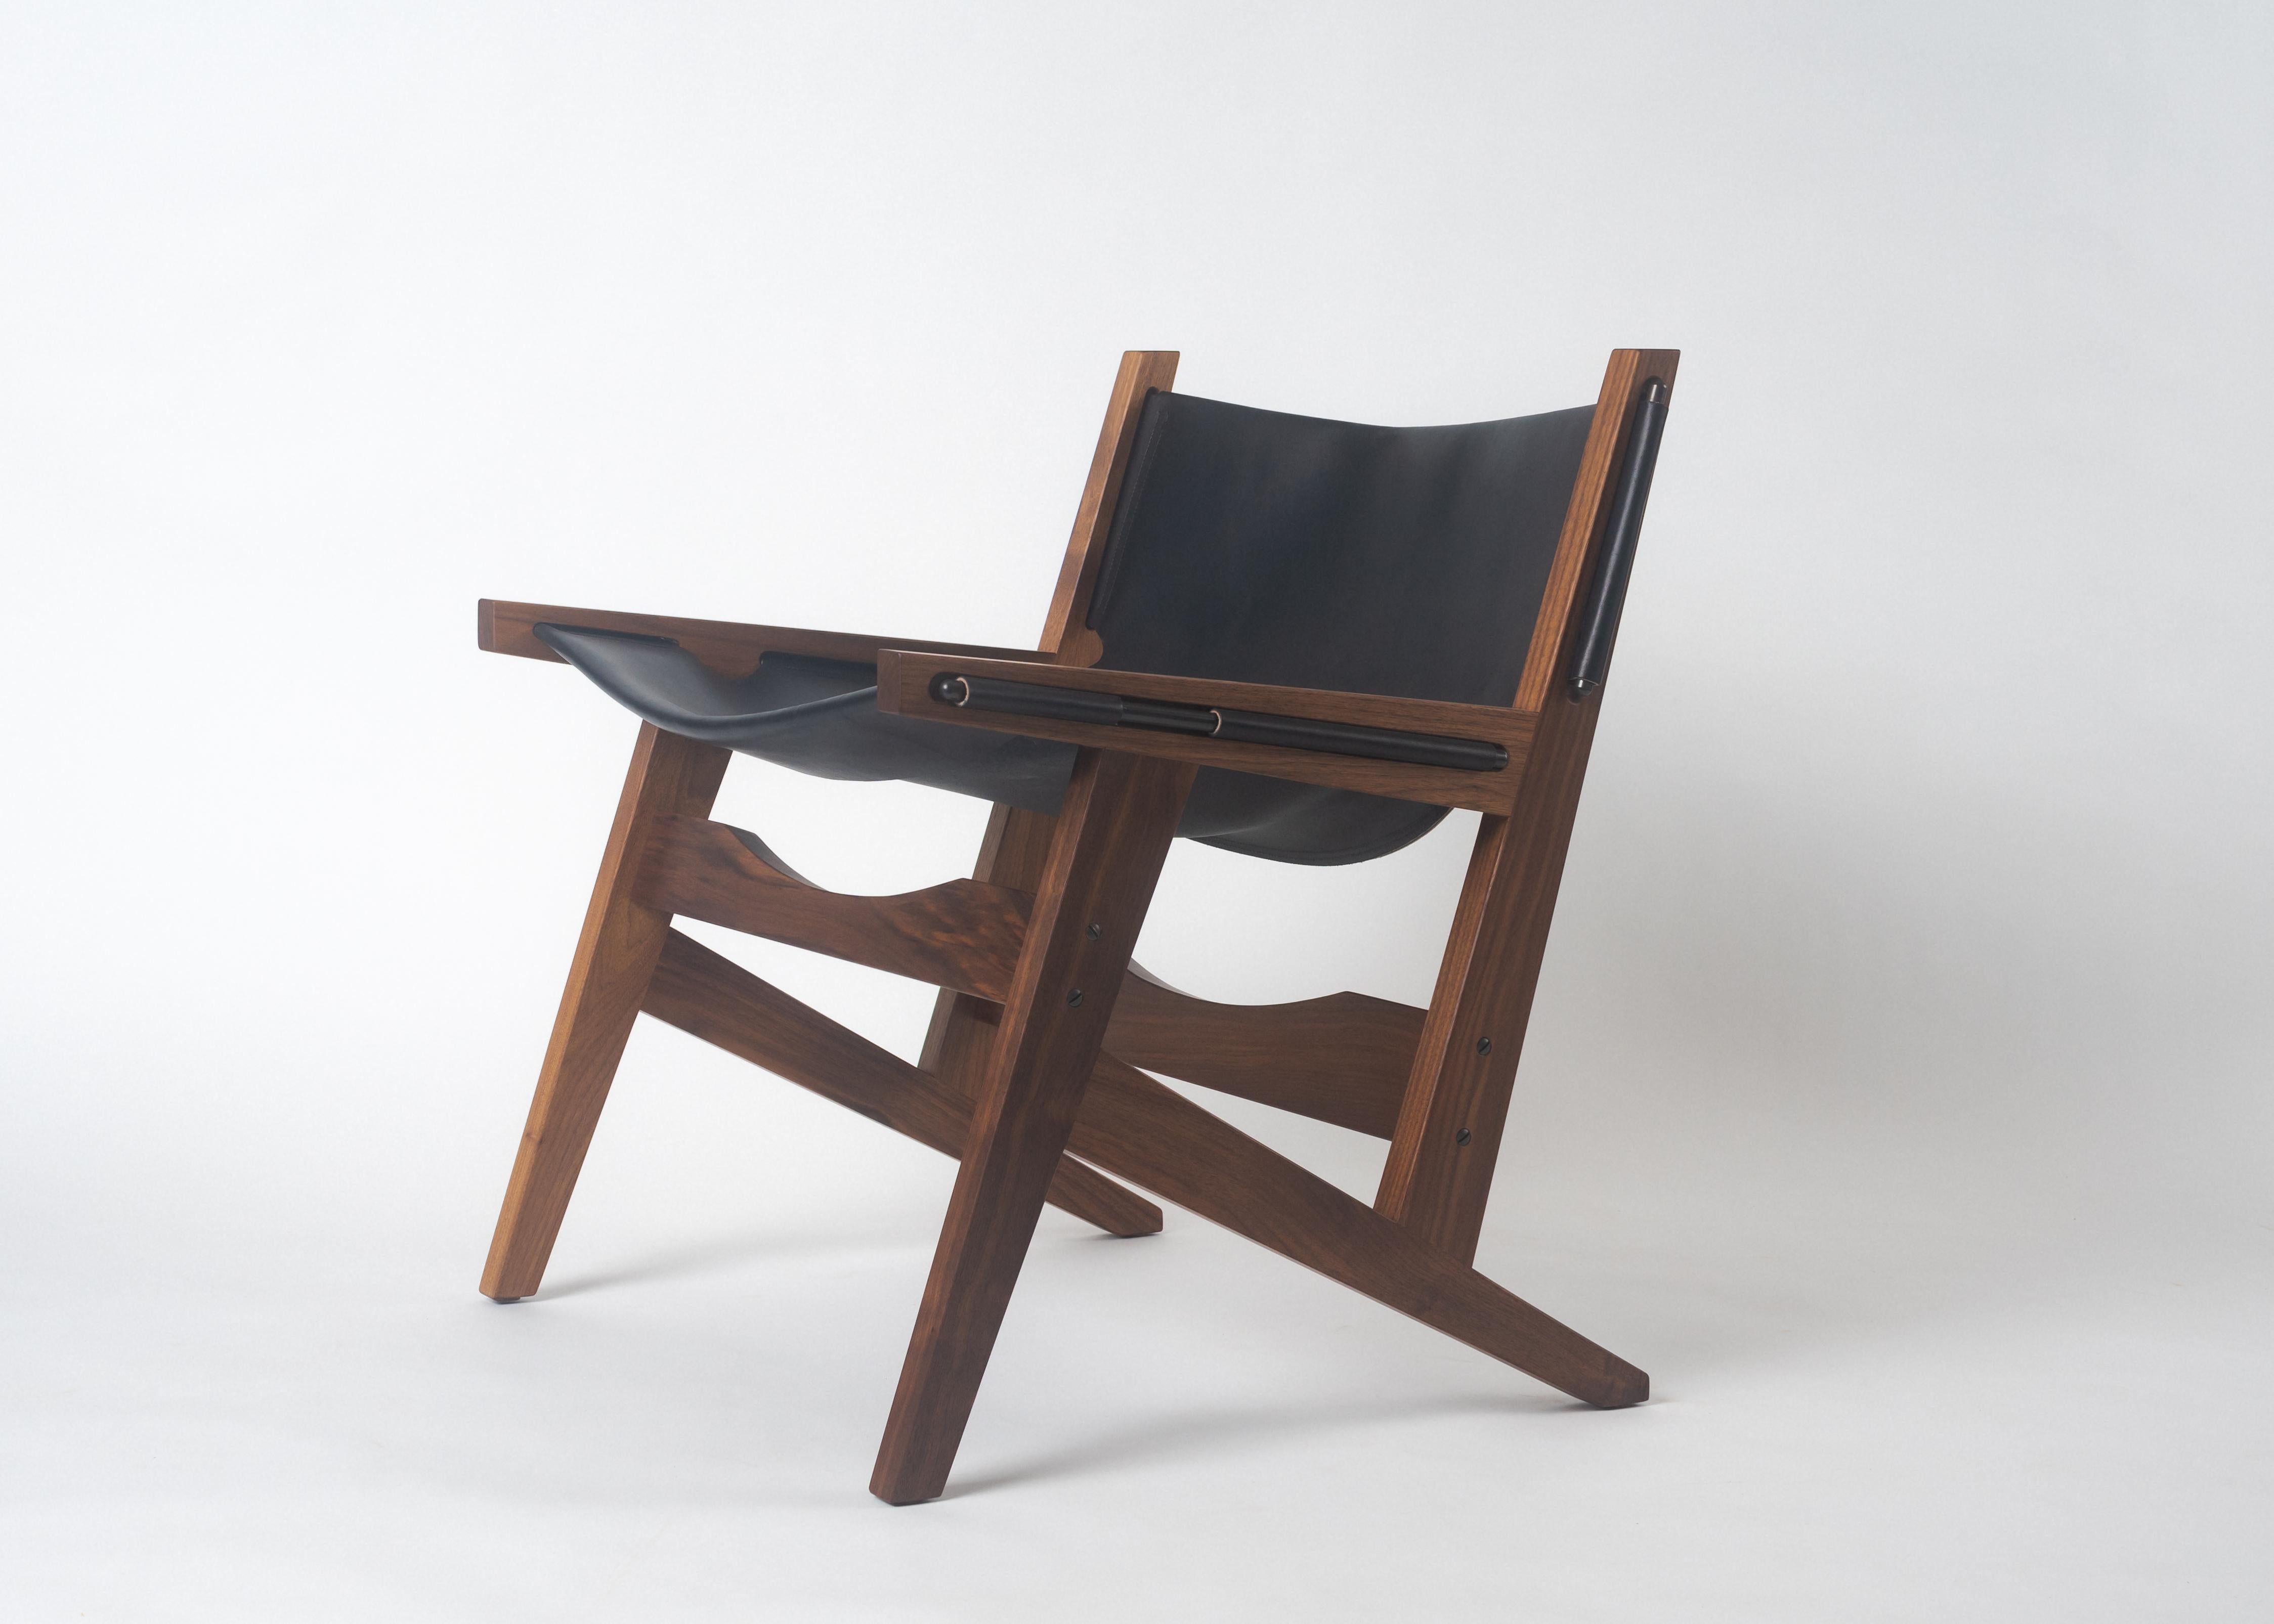 Phloem Studio Peninsula chair is a modern contemporary leather sling lounge chair. The hand crafted solid walnut frame holds the heavy weight bridle leather sling in place with solid shaped exposed brass rods. Appropriate as both a lounge chair or